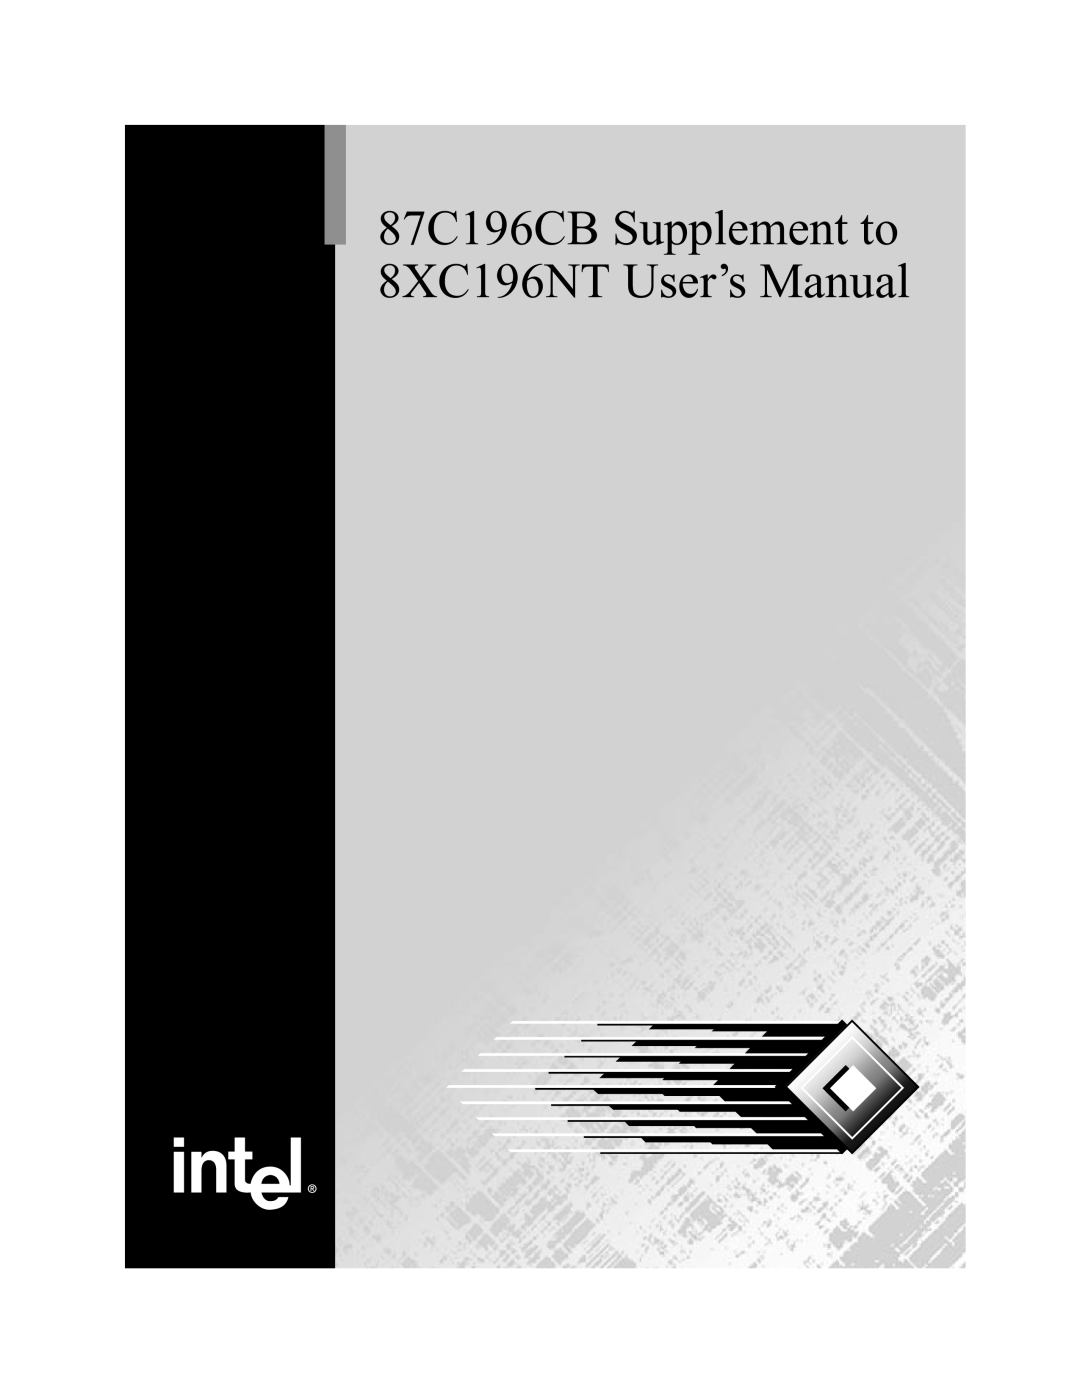 Intel user manual 87C196CB Supplement to 8XC196NT User’s Manual 